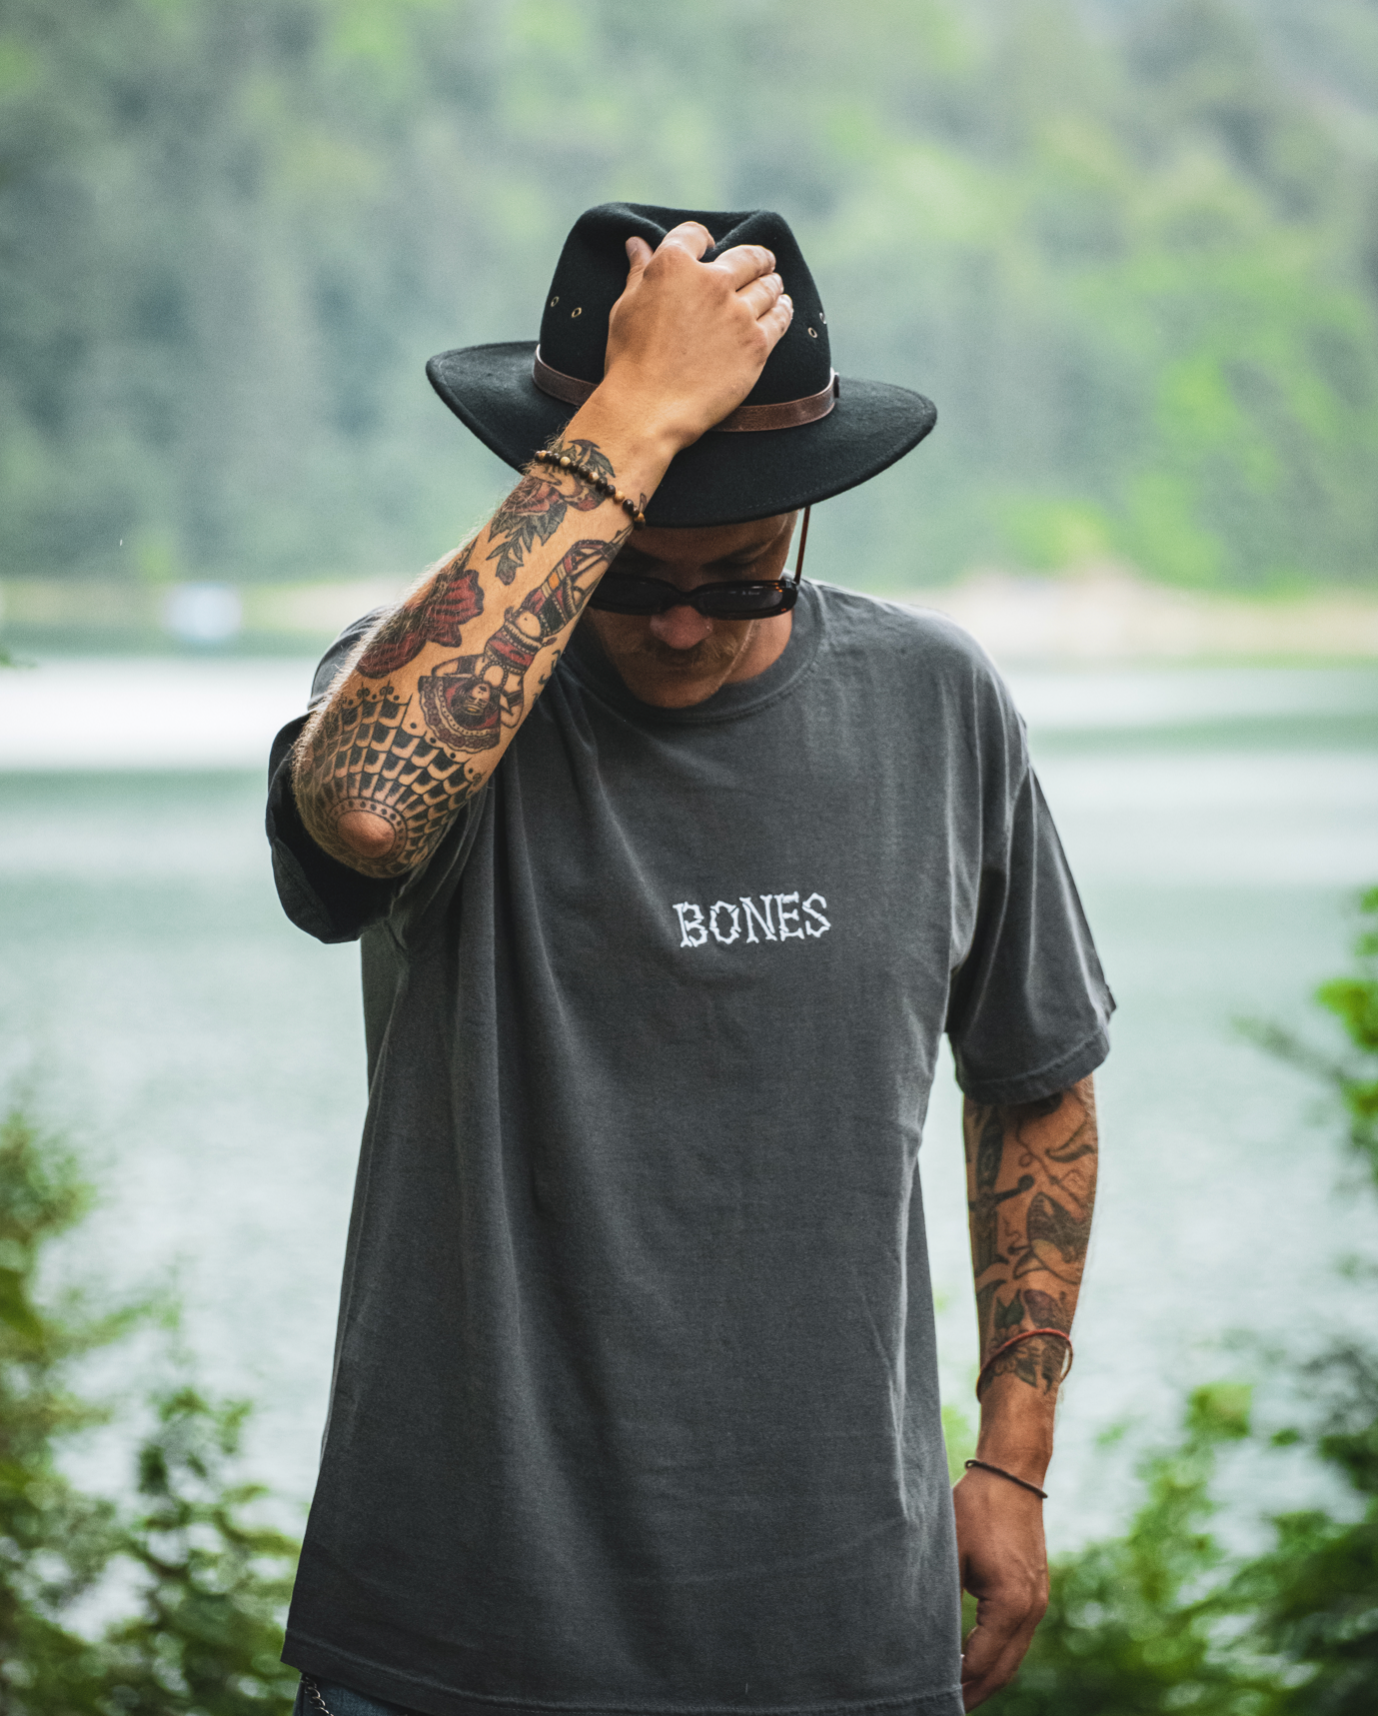 Bones Club Tee - Washed Out Black